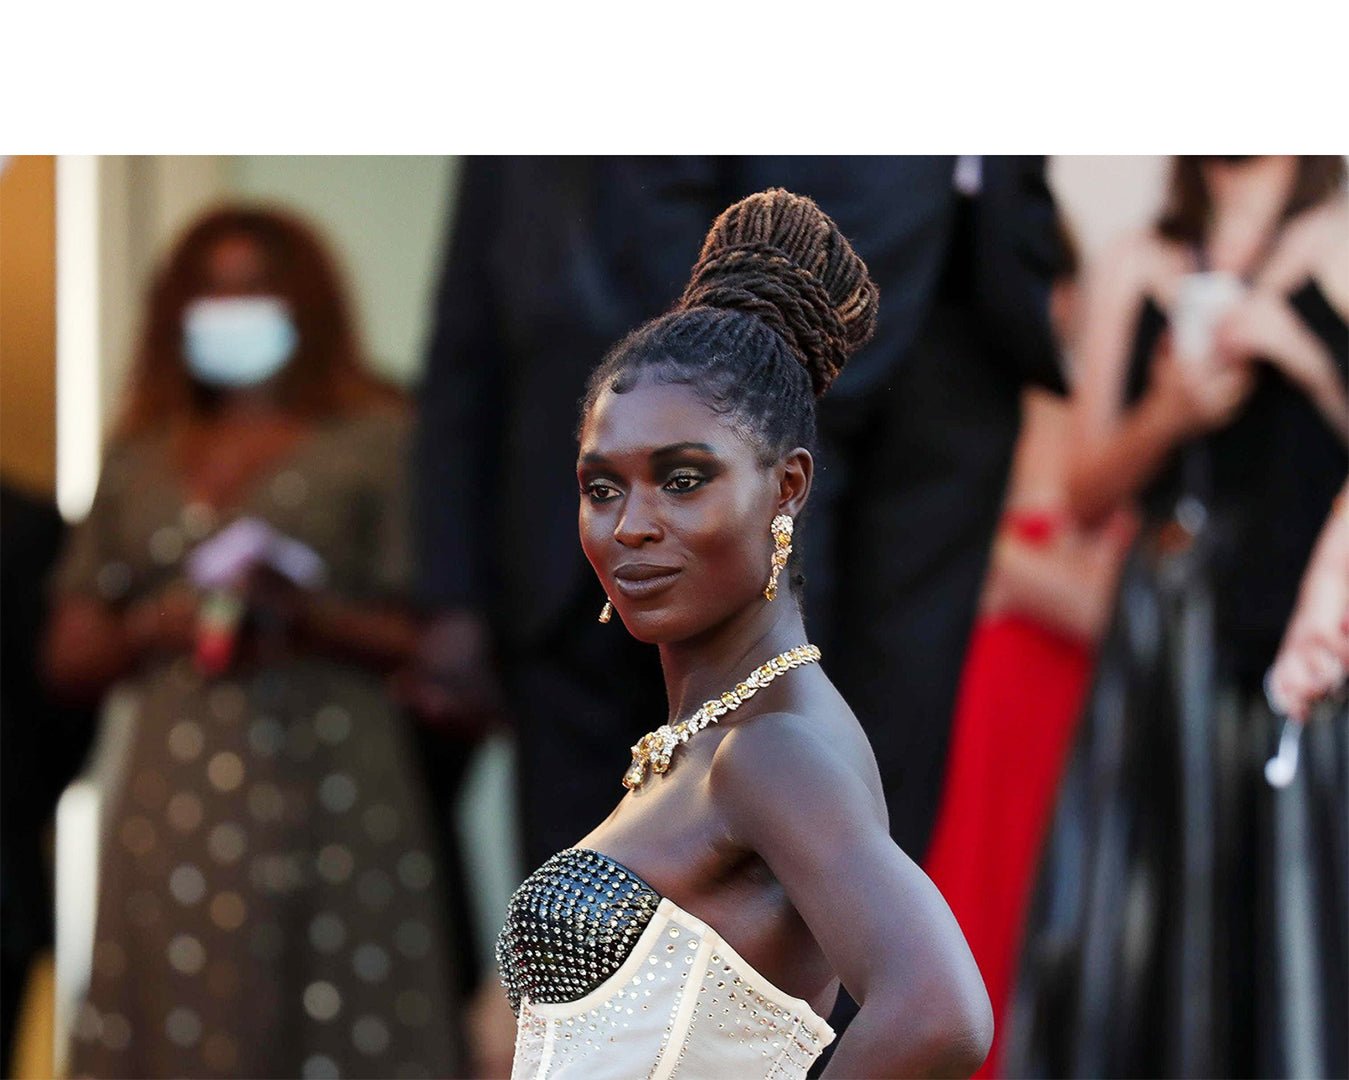 Actress Jodie Turner-Smith's Jewelry Was Stolen From Her Hotel Room in Cannes - DSF Antique Jewelry